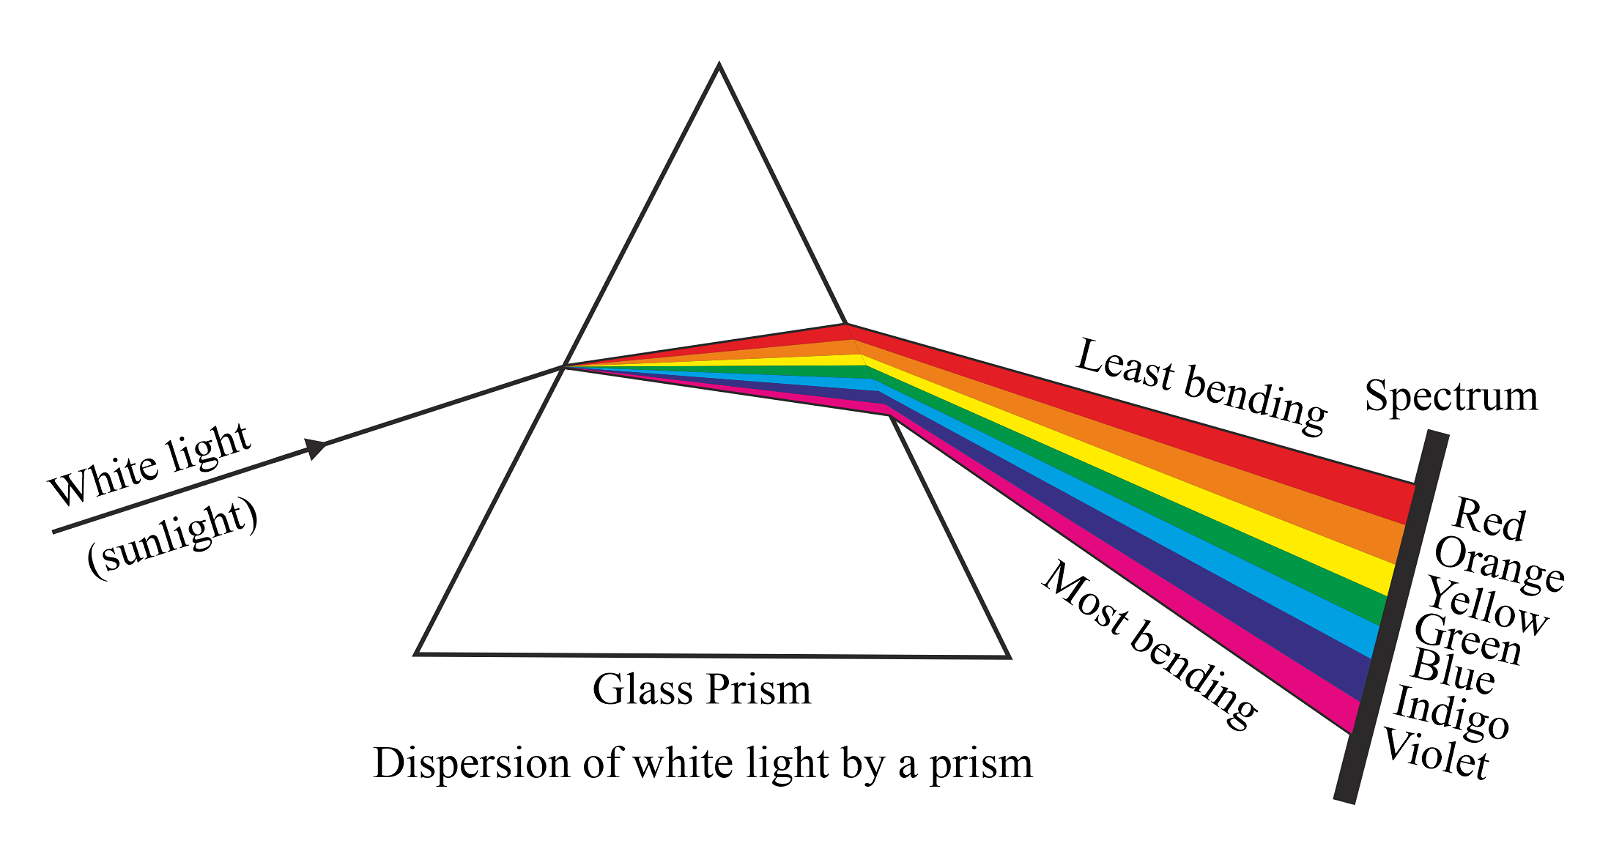 With the help of a diagram show the dispersion of white light of a prism